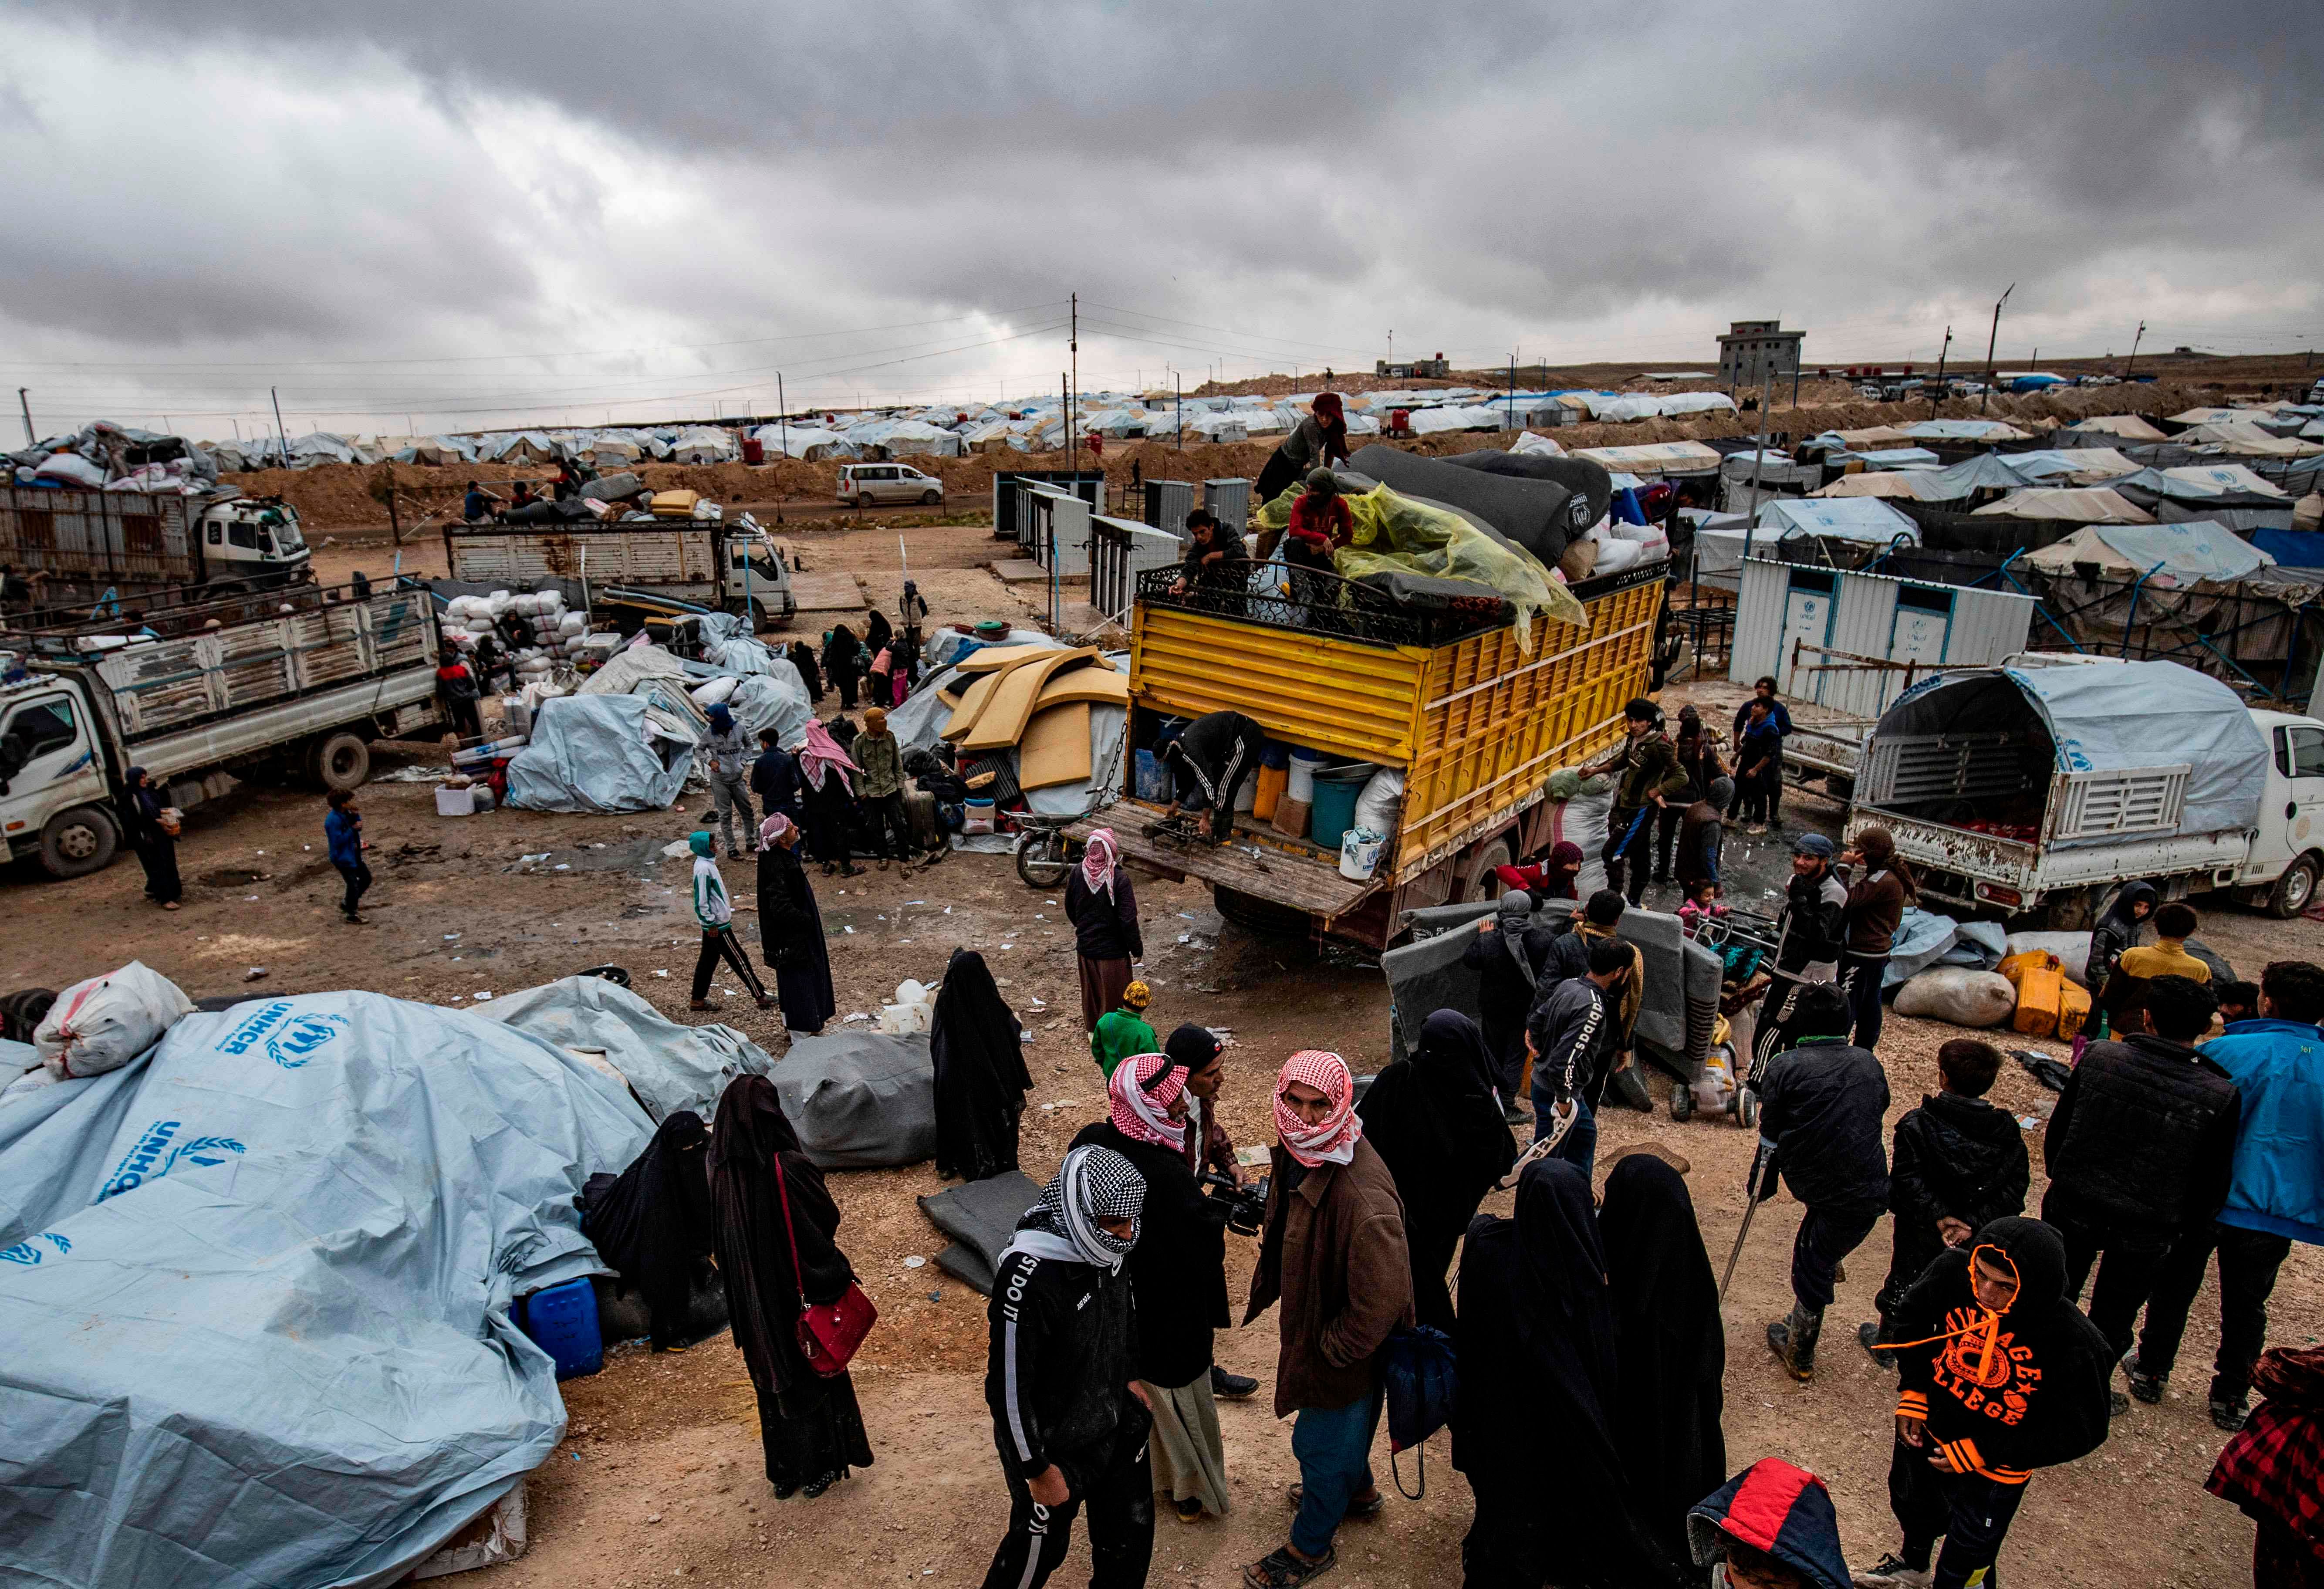 Syrians load their belongings onto trucks as they prepare to leave the Kurdish-run al-Hol camp holding relatives of alleged Islamic State (IS) group fighters, in the al-Hasakeh governorate in northeastern Syria, on November 16, 2020. - A Kurdish official in charge of the region's camps, said 515 people from 120 families were returning to areas in the east of Deir Ezzor province, the first to do so after the Kurdish authorities in northeast Syria vowed to allow thousands of Syrians including the families of IS fighters out of the over-populated camp. Credit: AFP Photo